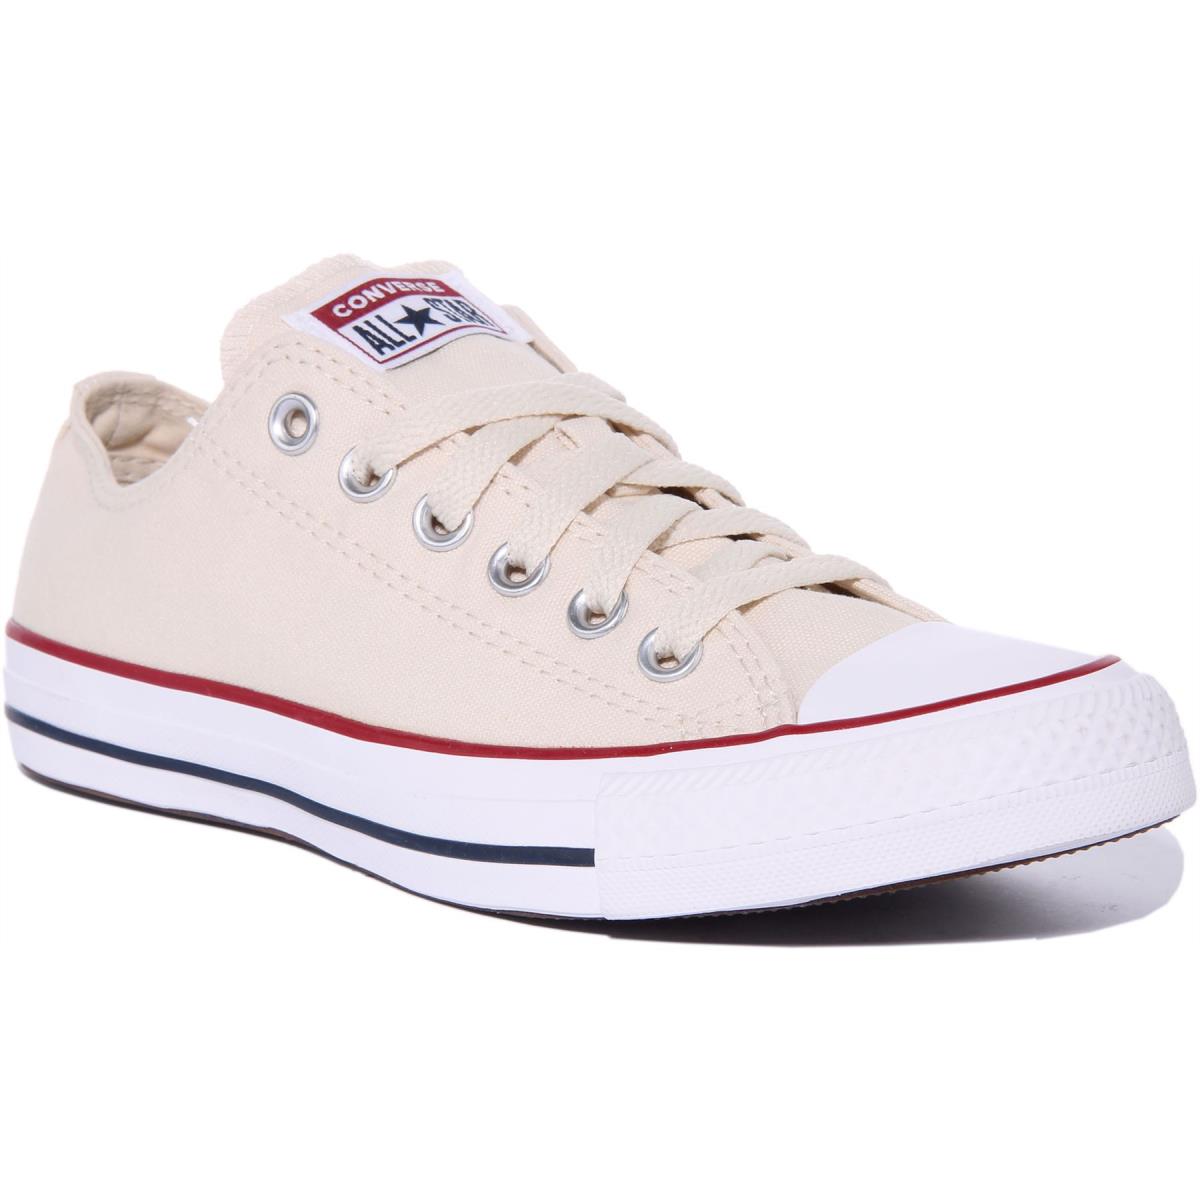 Converse 159485C Chuck Taylor All Star Canvas Trainers Beige Size 2.5 - 13 BEIGE